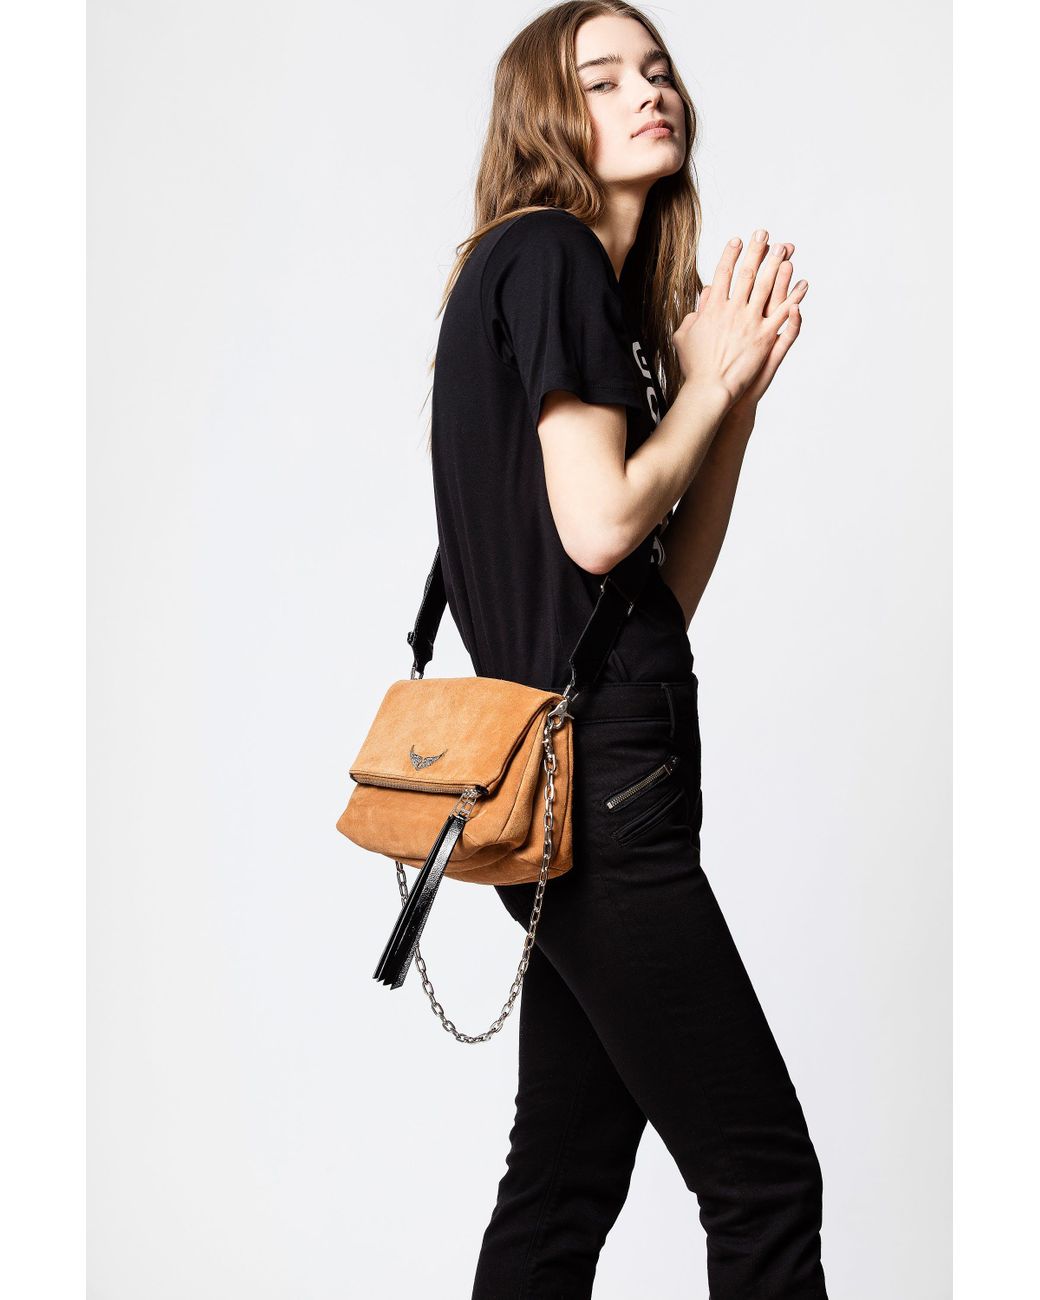 Zadig & Voltaire Rocky Suede Patent Bag in Brown | Lyst